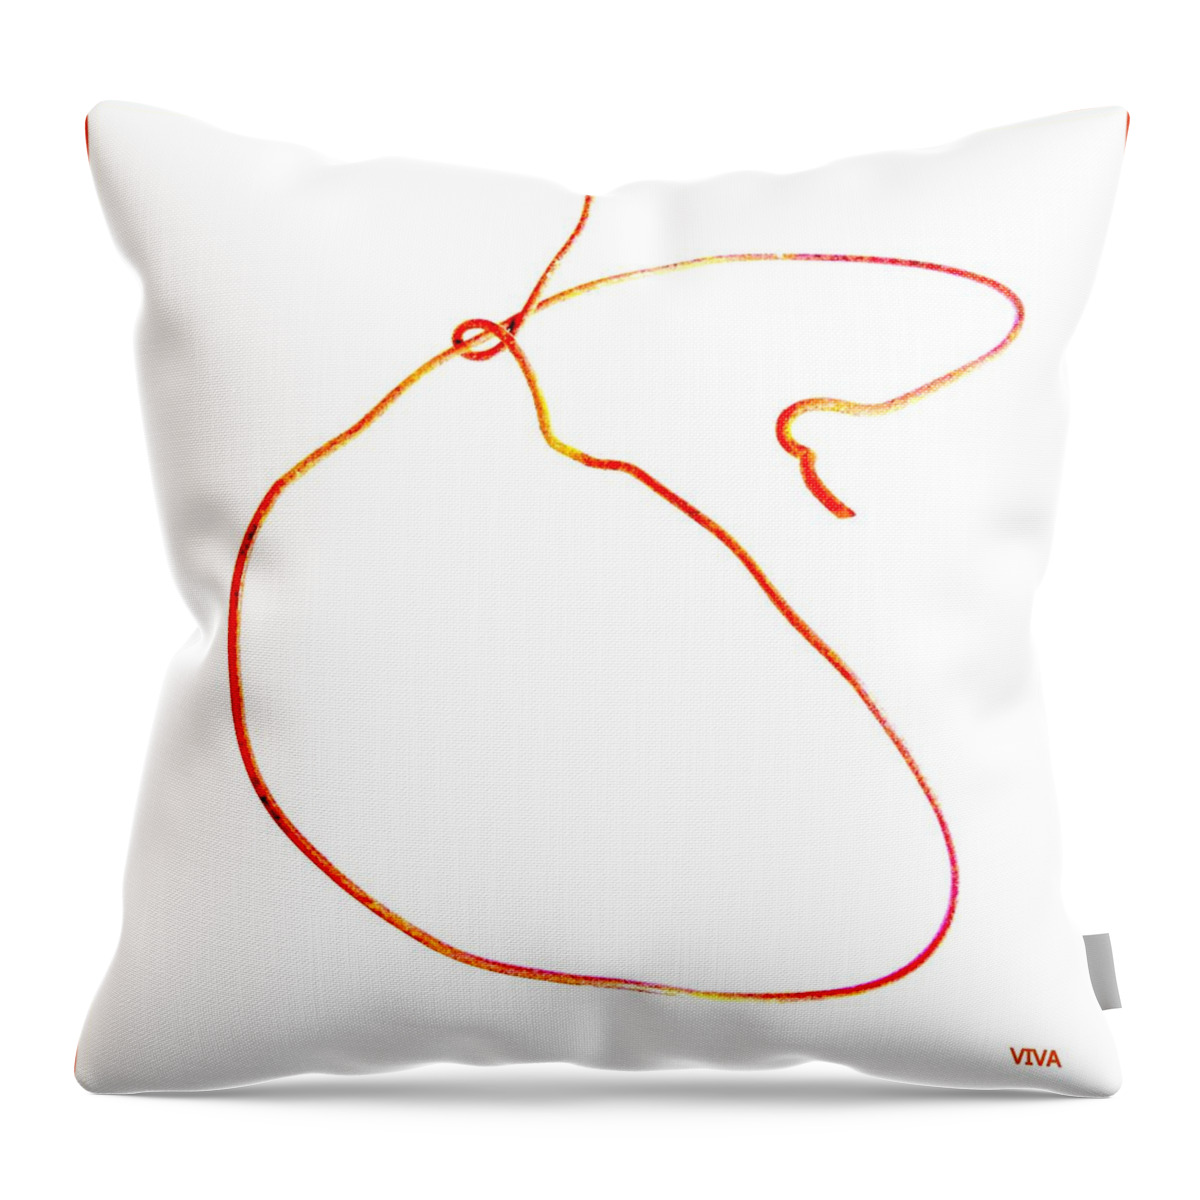 Hotlinked Throw Pillow featuring the photograph Hotlinked by VIVA Anderson